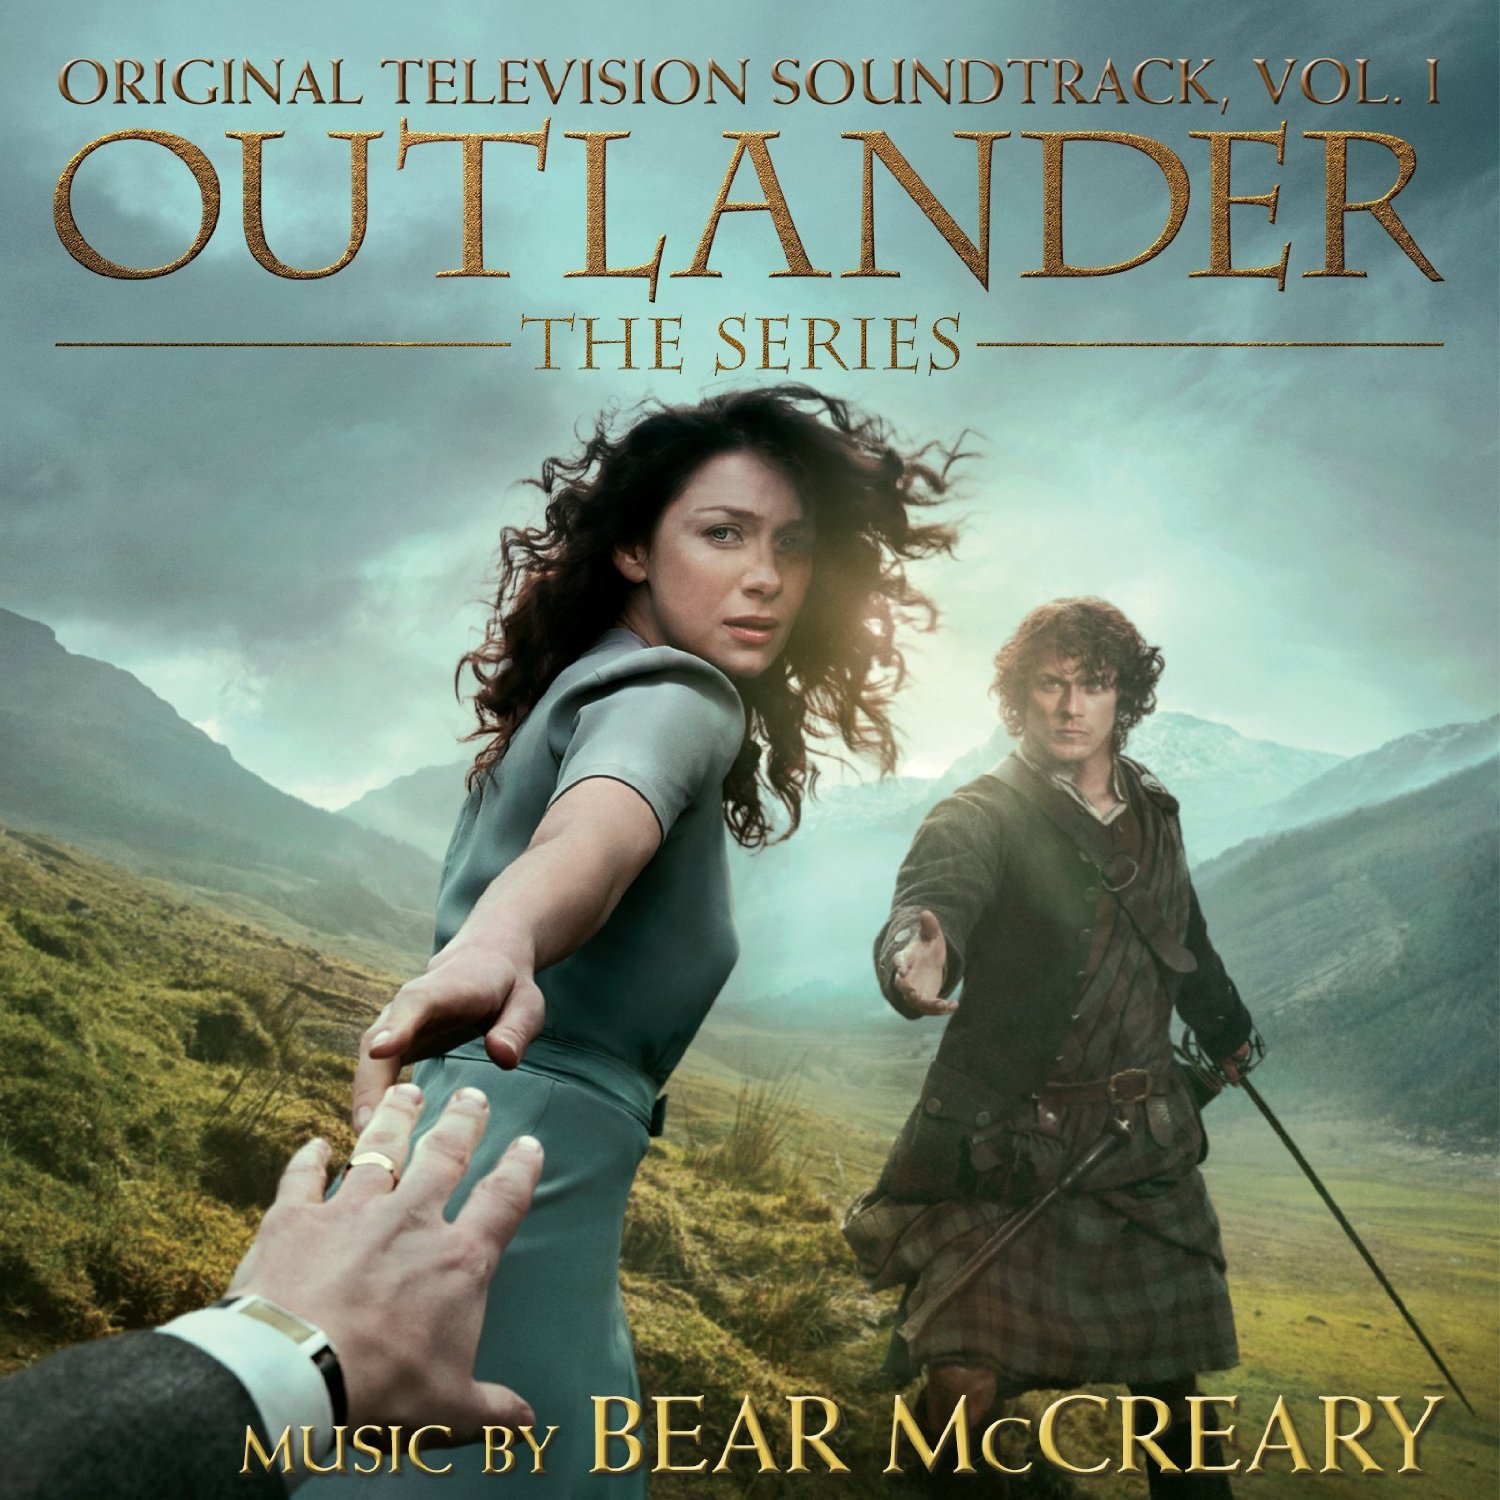 music on opening of outlander episodes